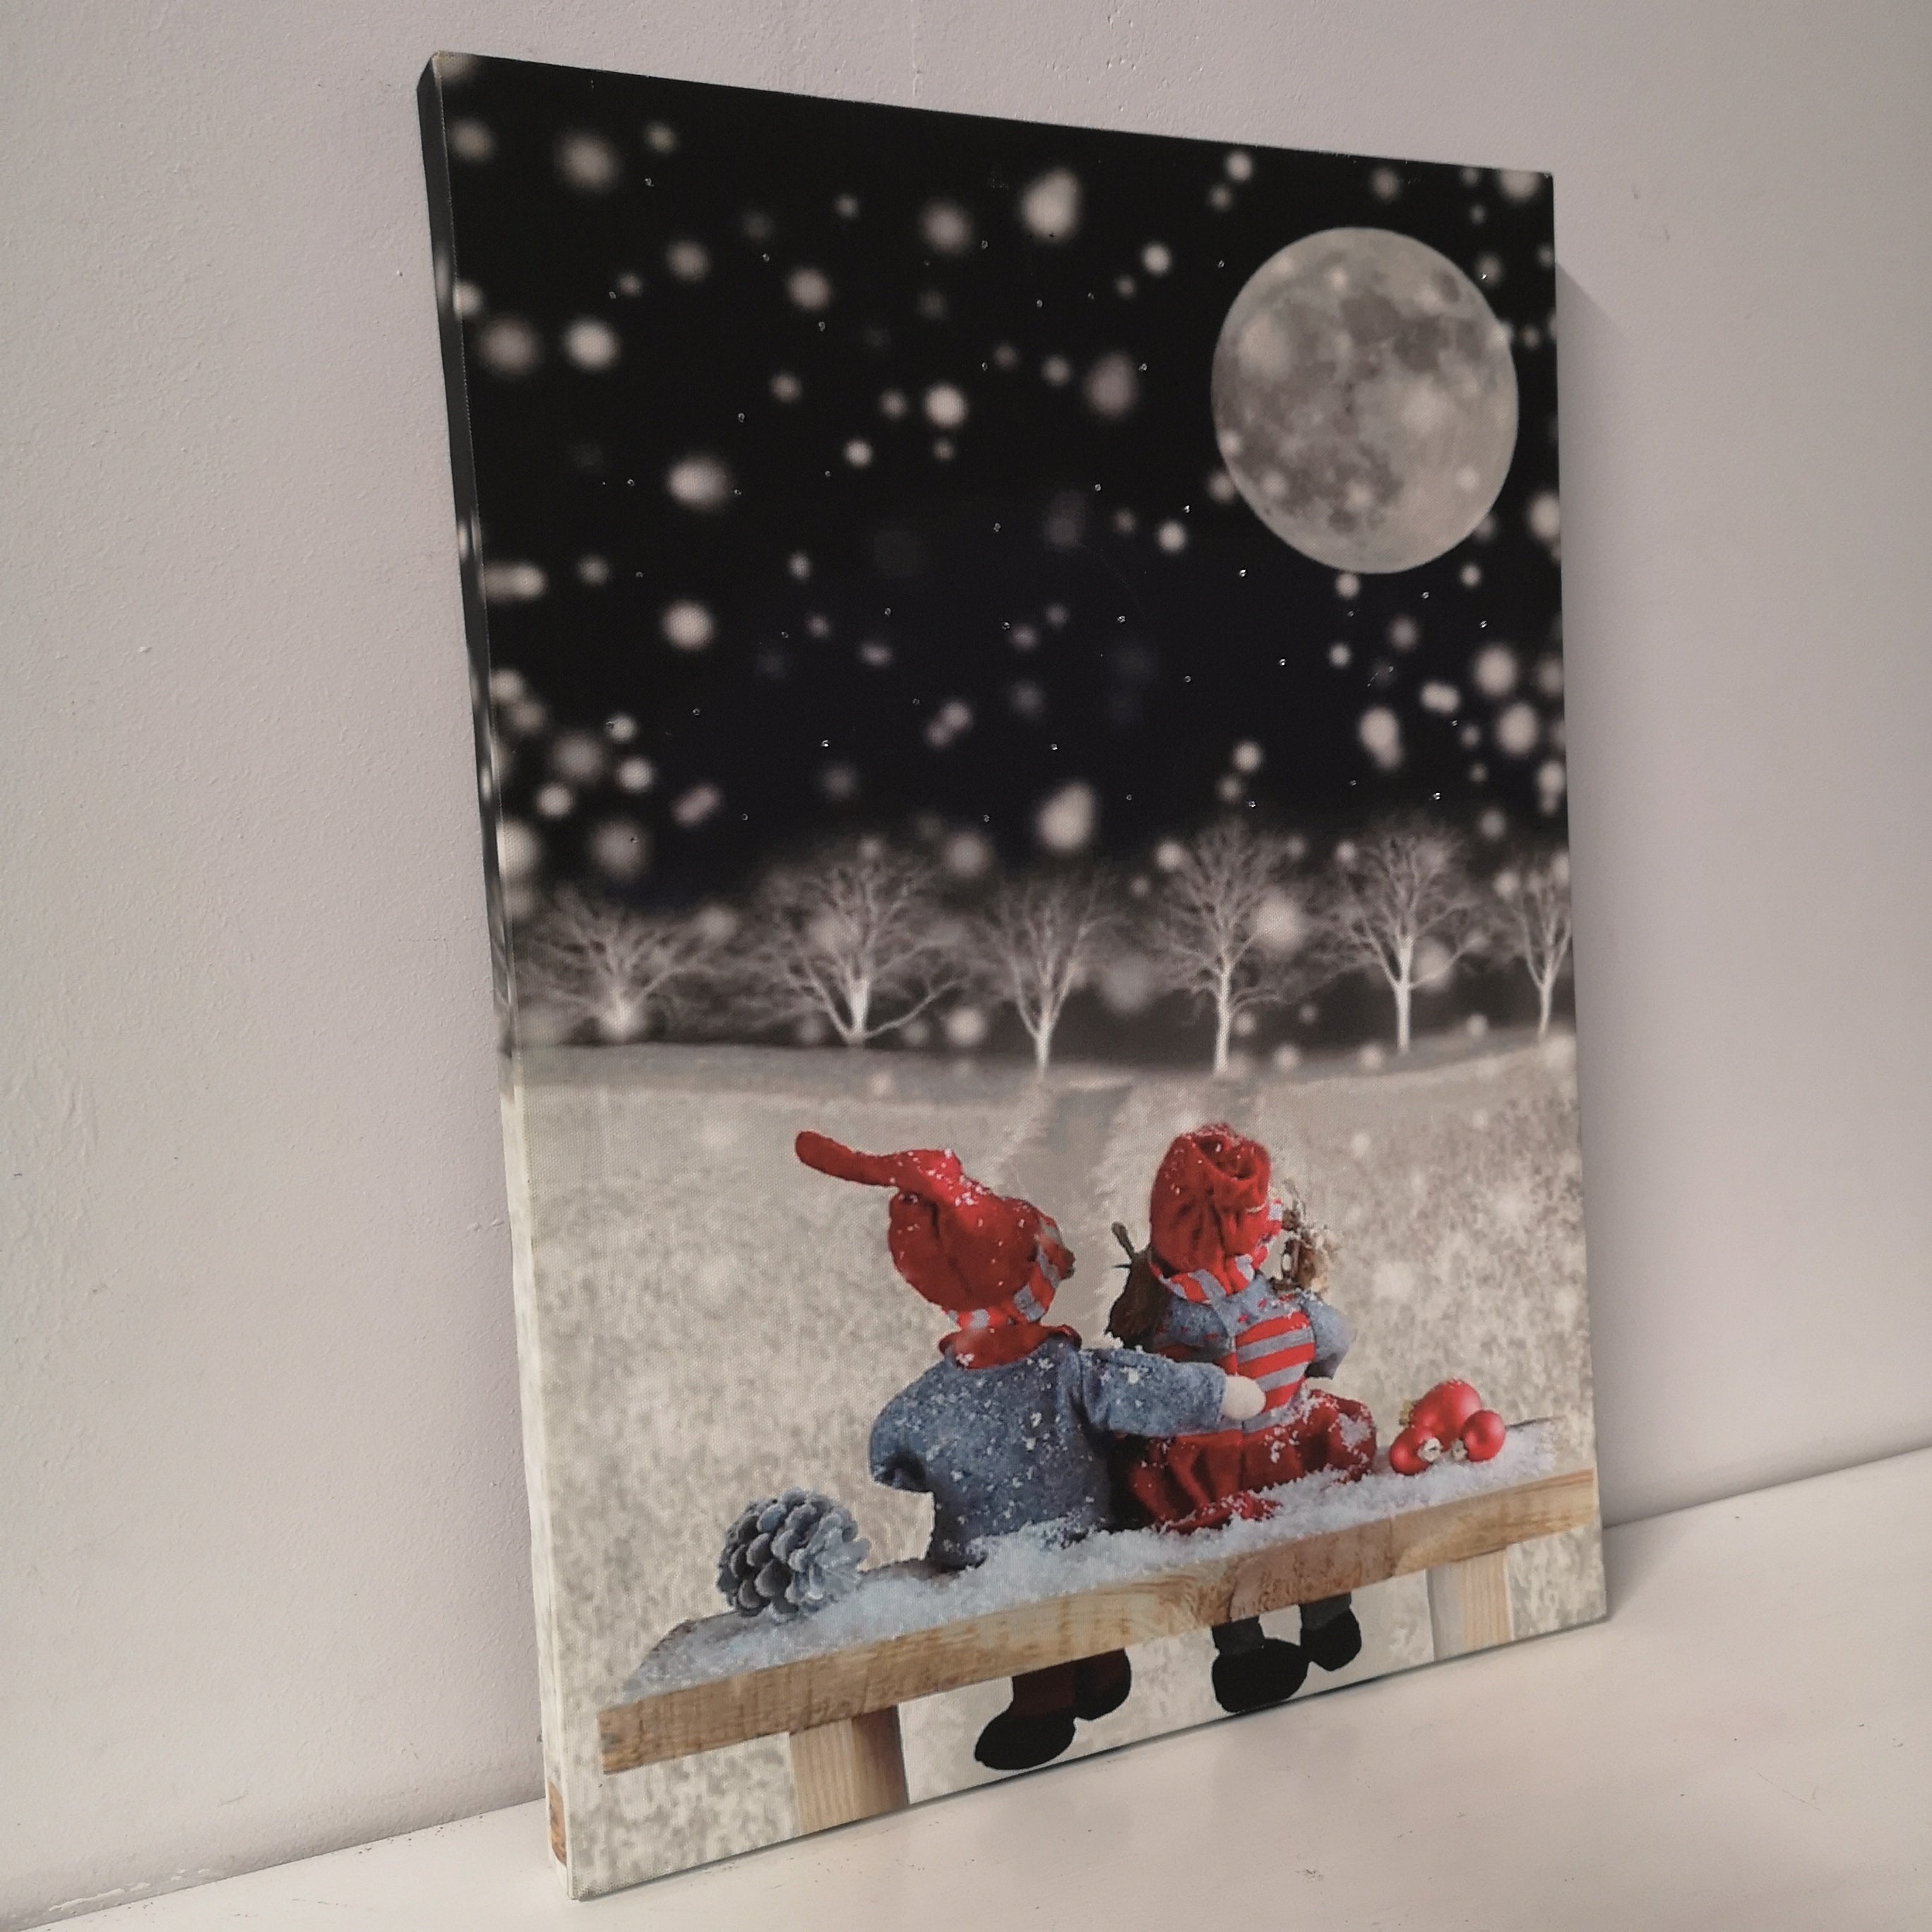 40 x 30cm Fire Optic Christmas Wall Art Canvas with Winter Friends Scene